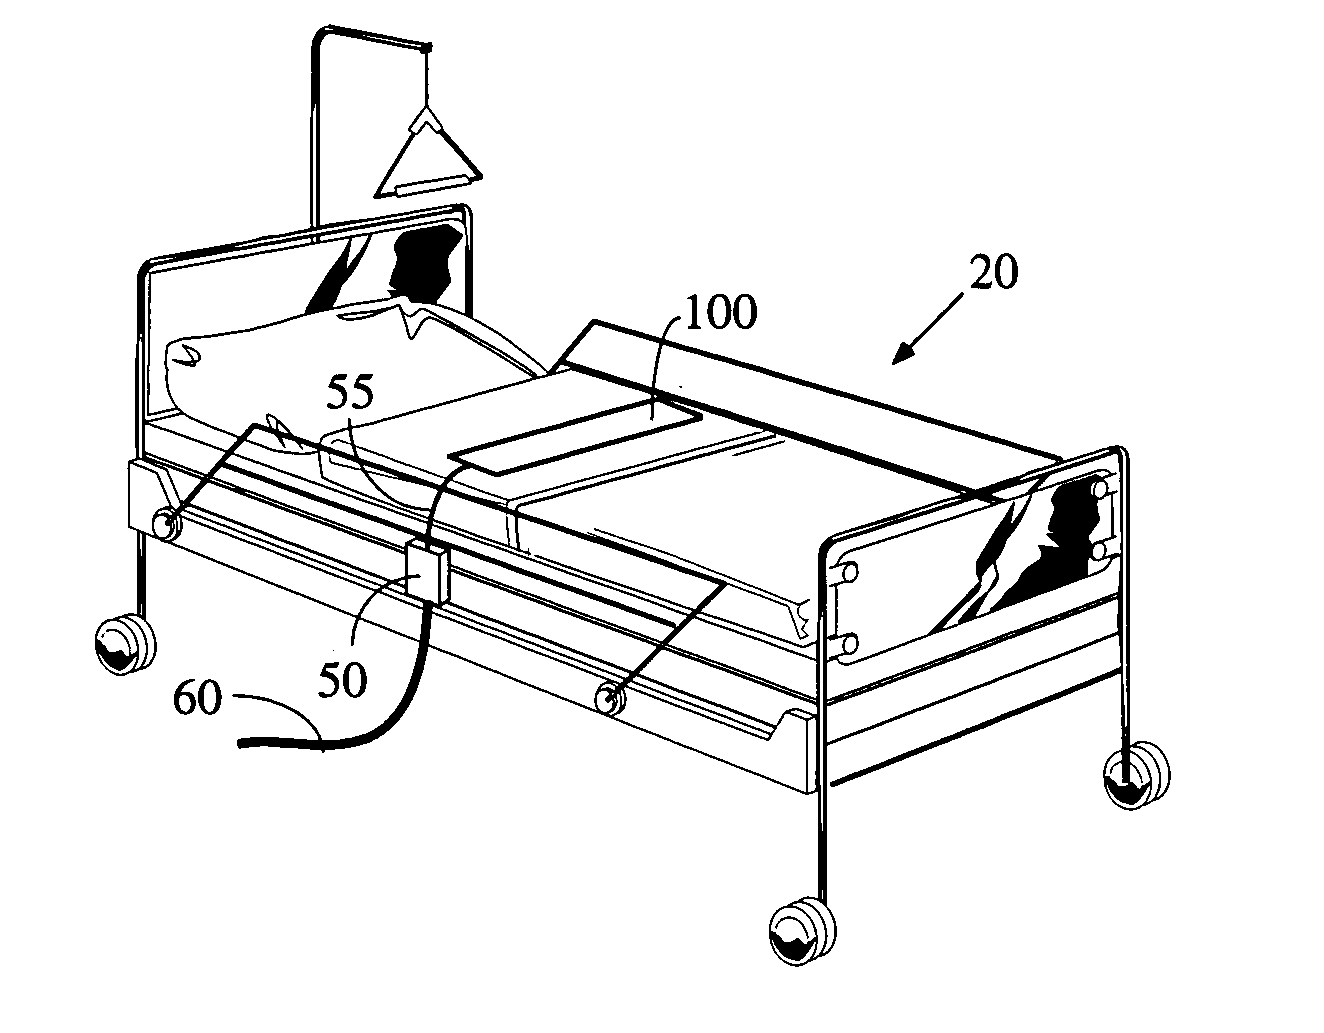 Sensor and method for detecting a patient's movement via position and occlusion